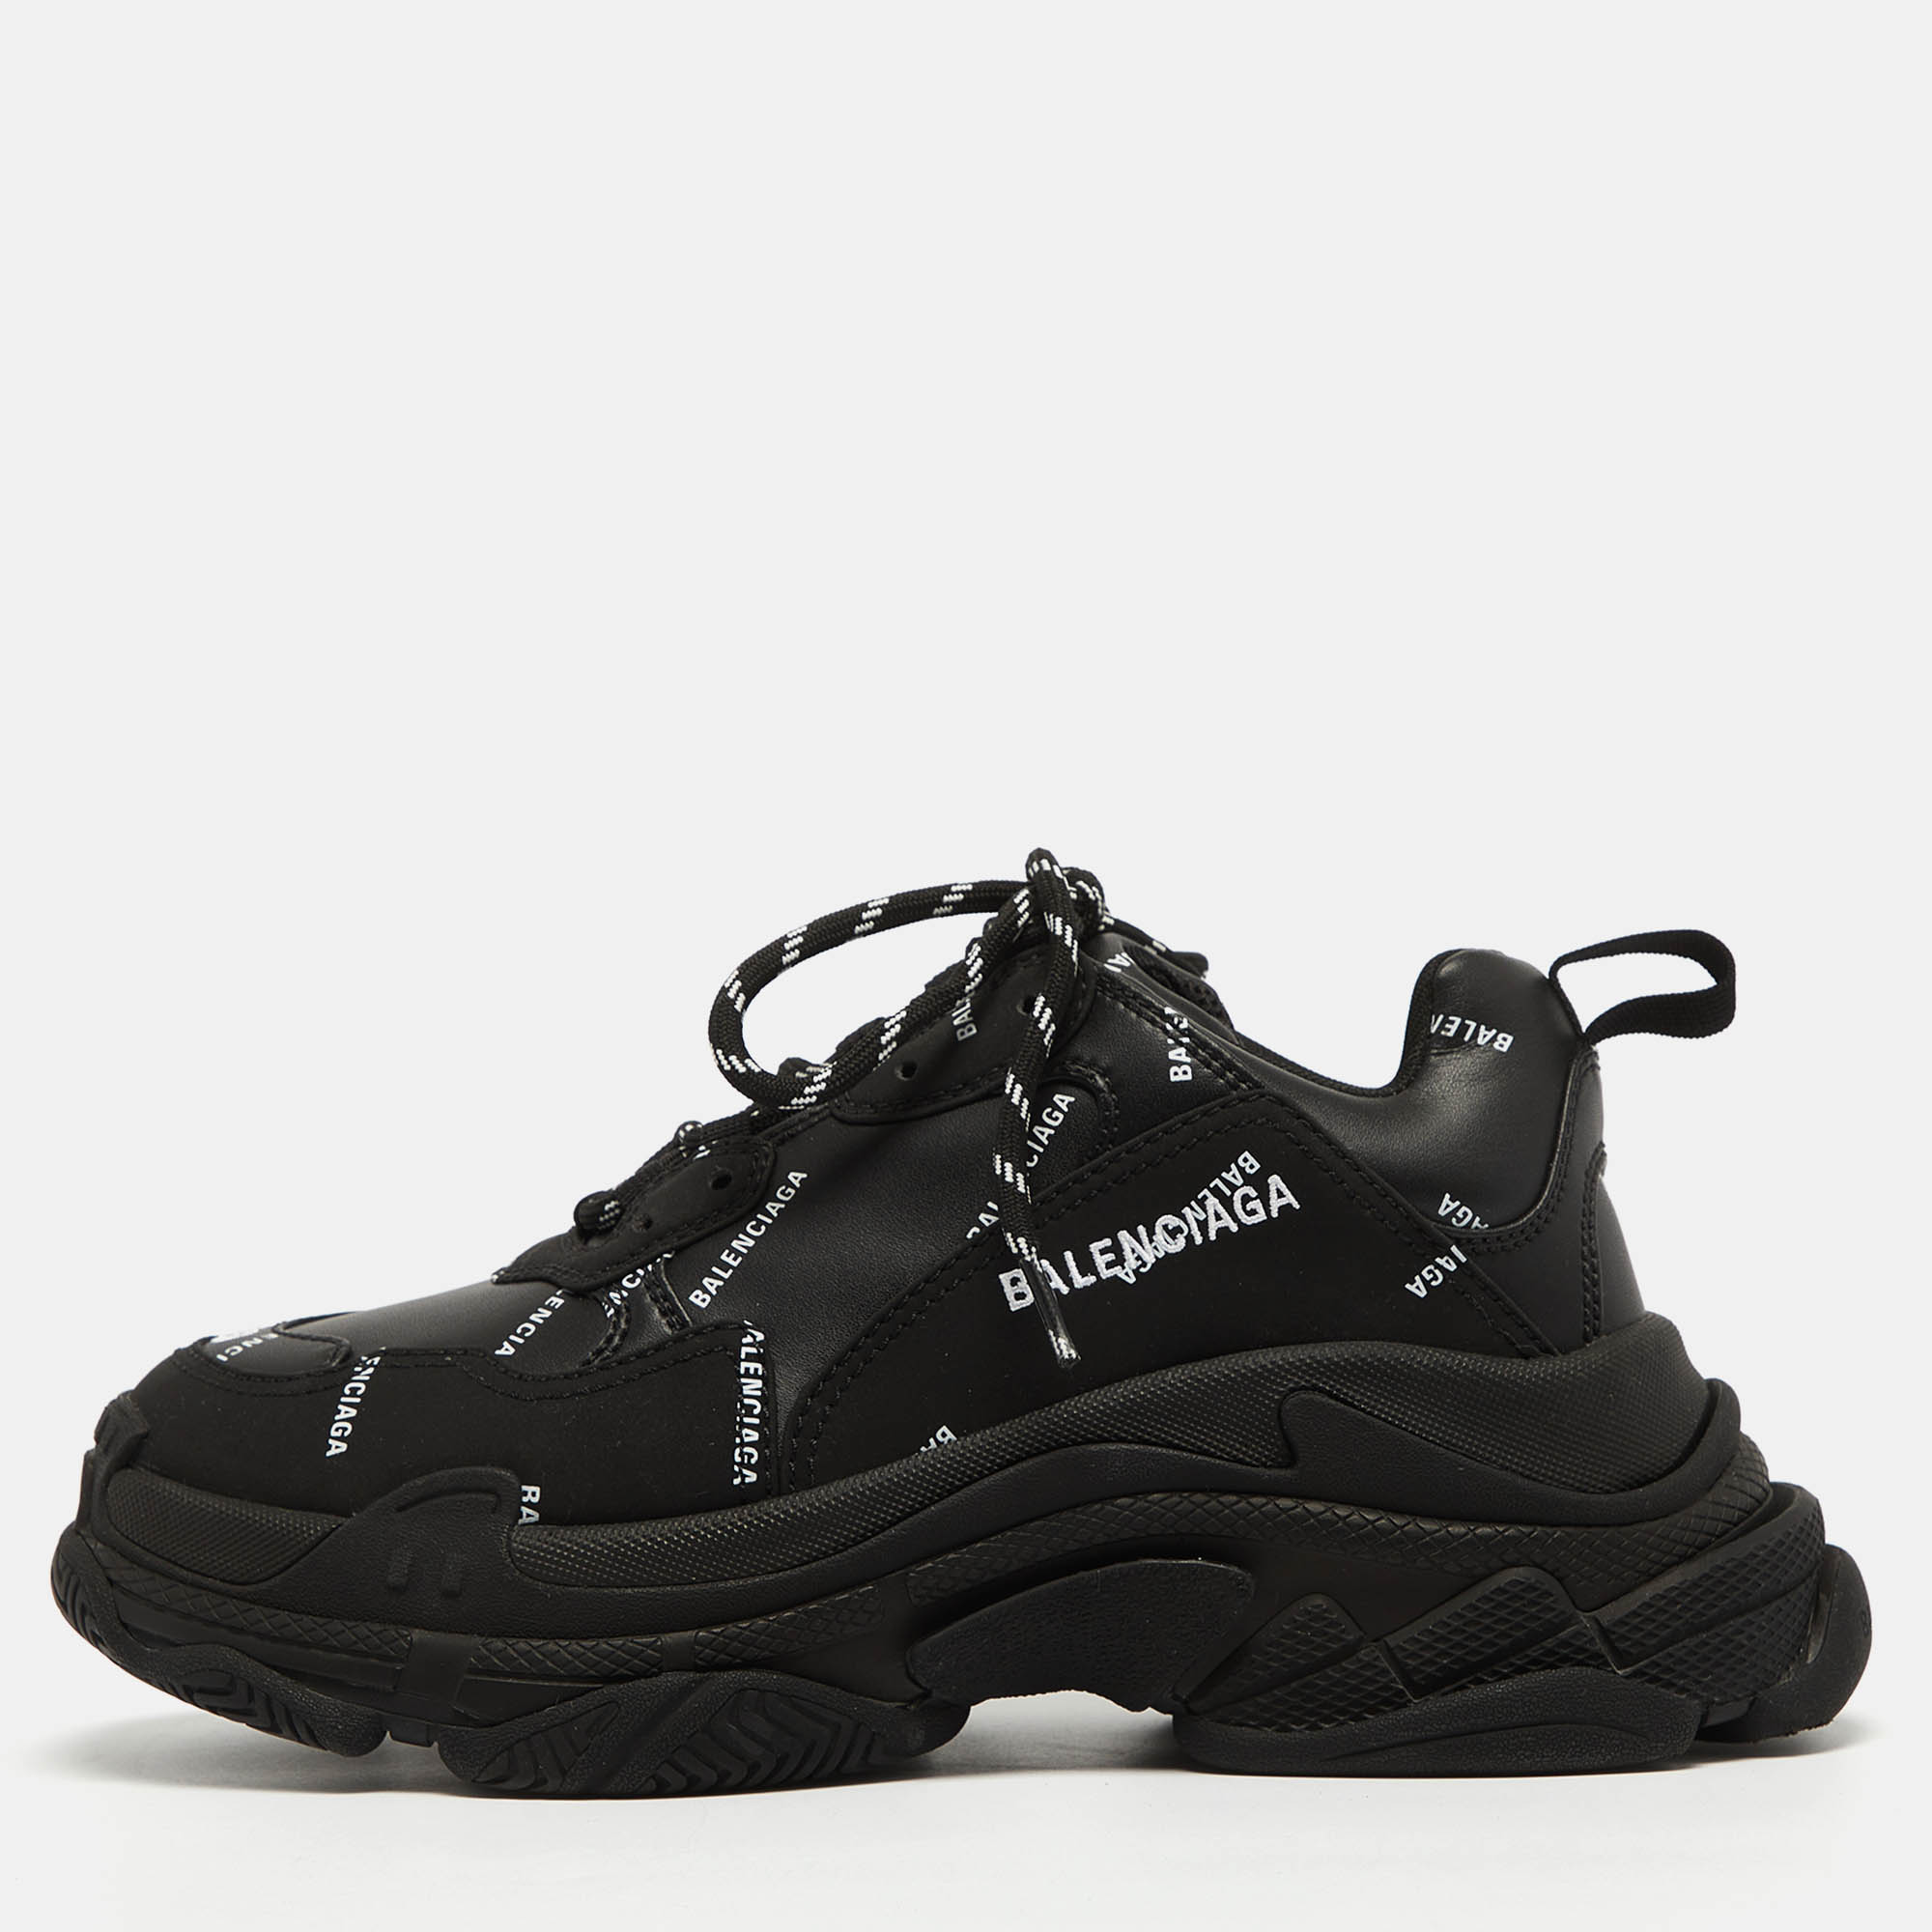 Balenciaga black faux leather triple s all over logo sneakers size 39